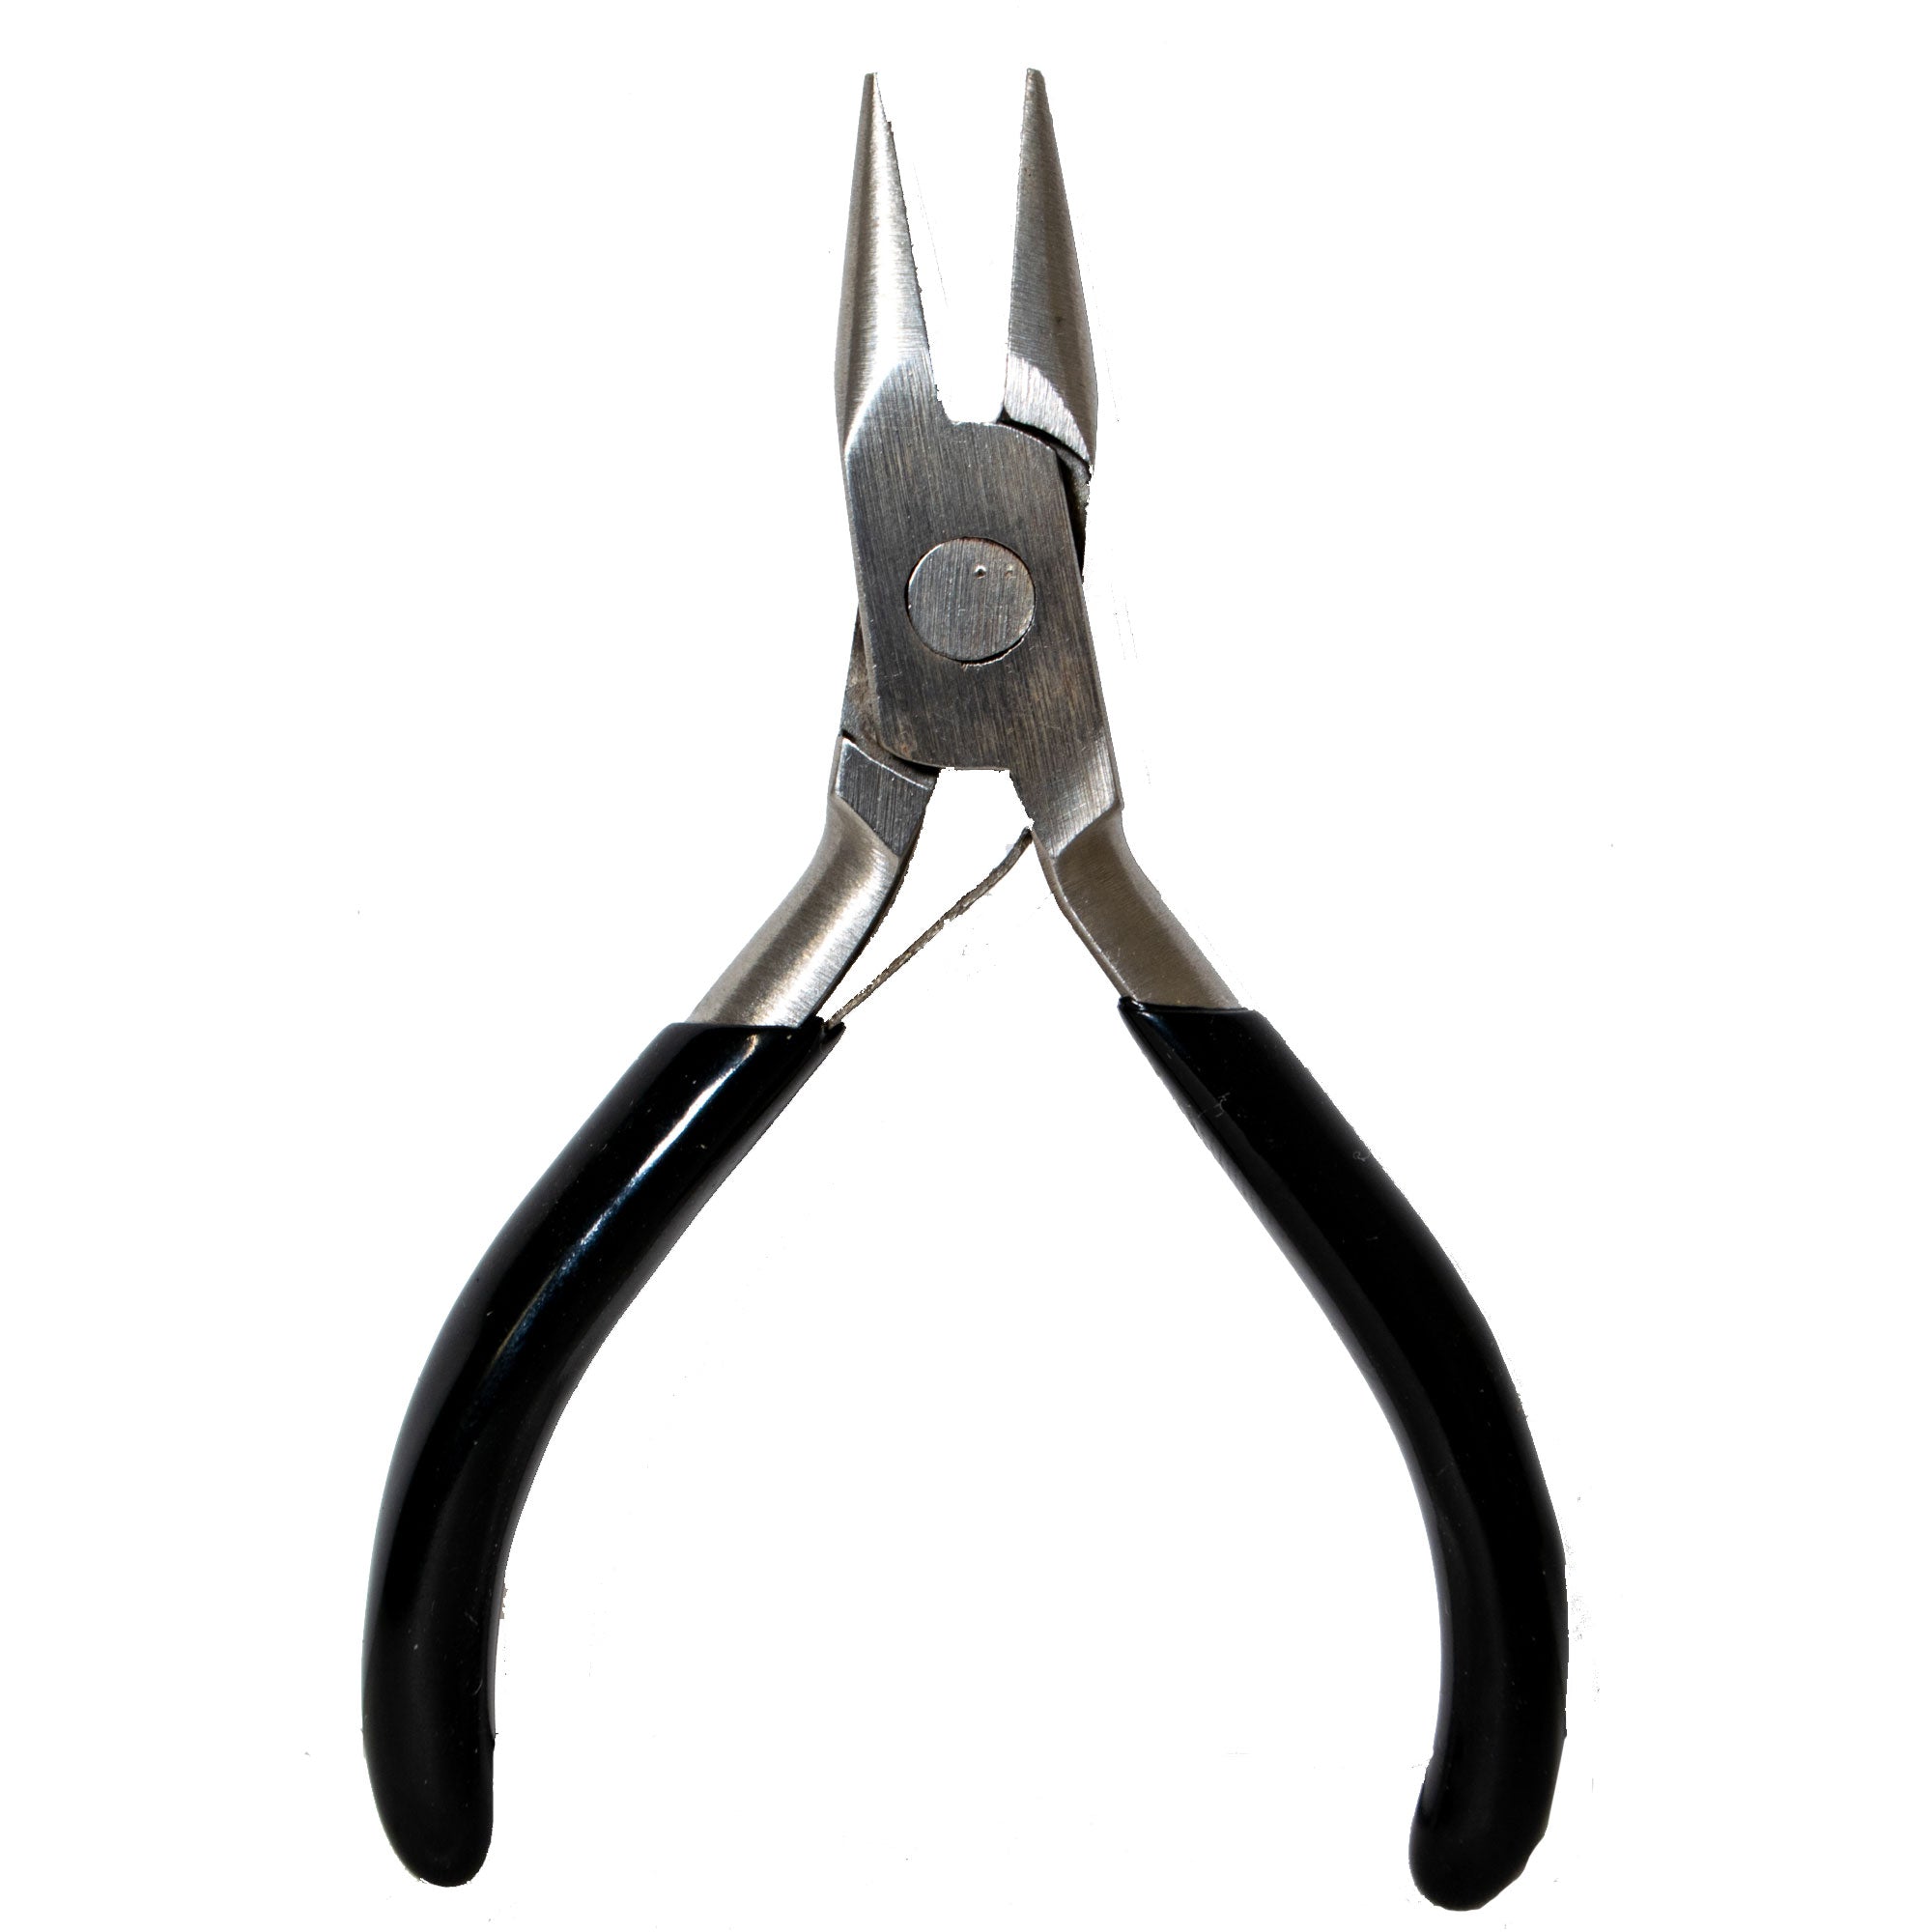 Miniature Chain-nose Pliers, 3 inches